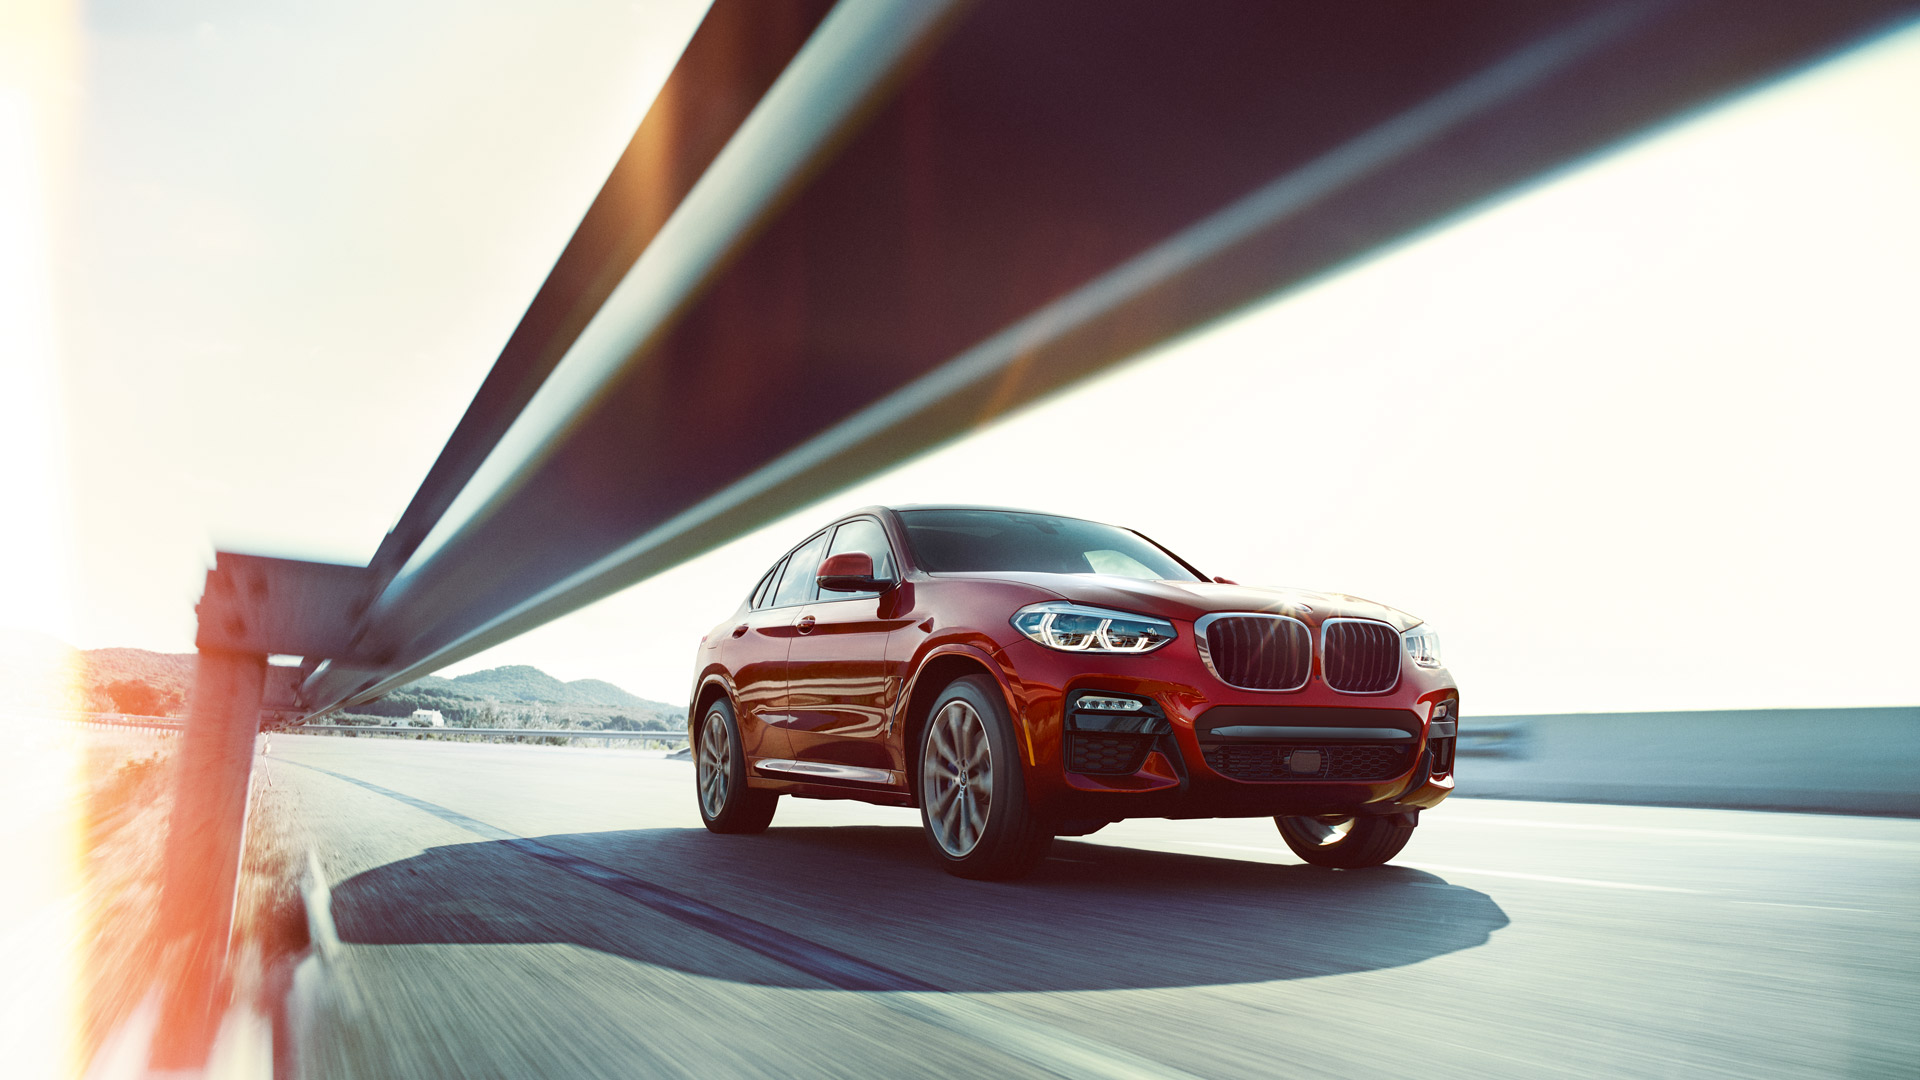 BMW BMW X4 German Cars Car Red Cars Front Angle View Road 1920x1080